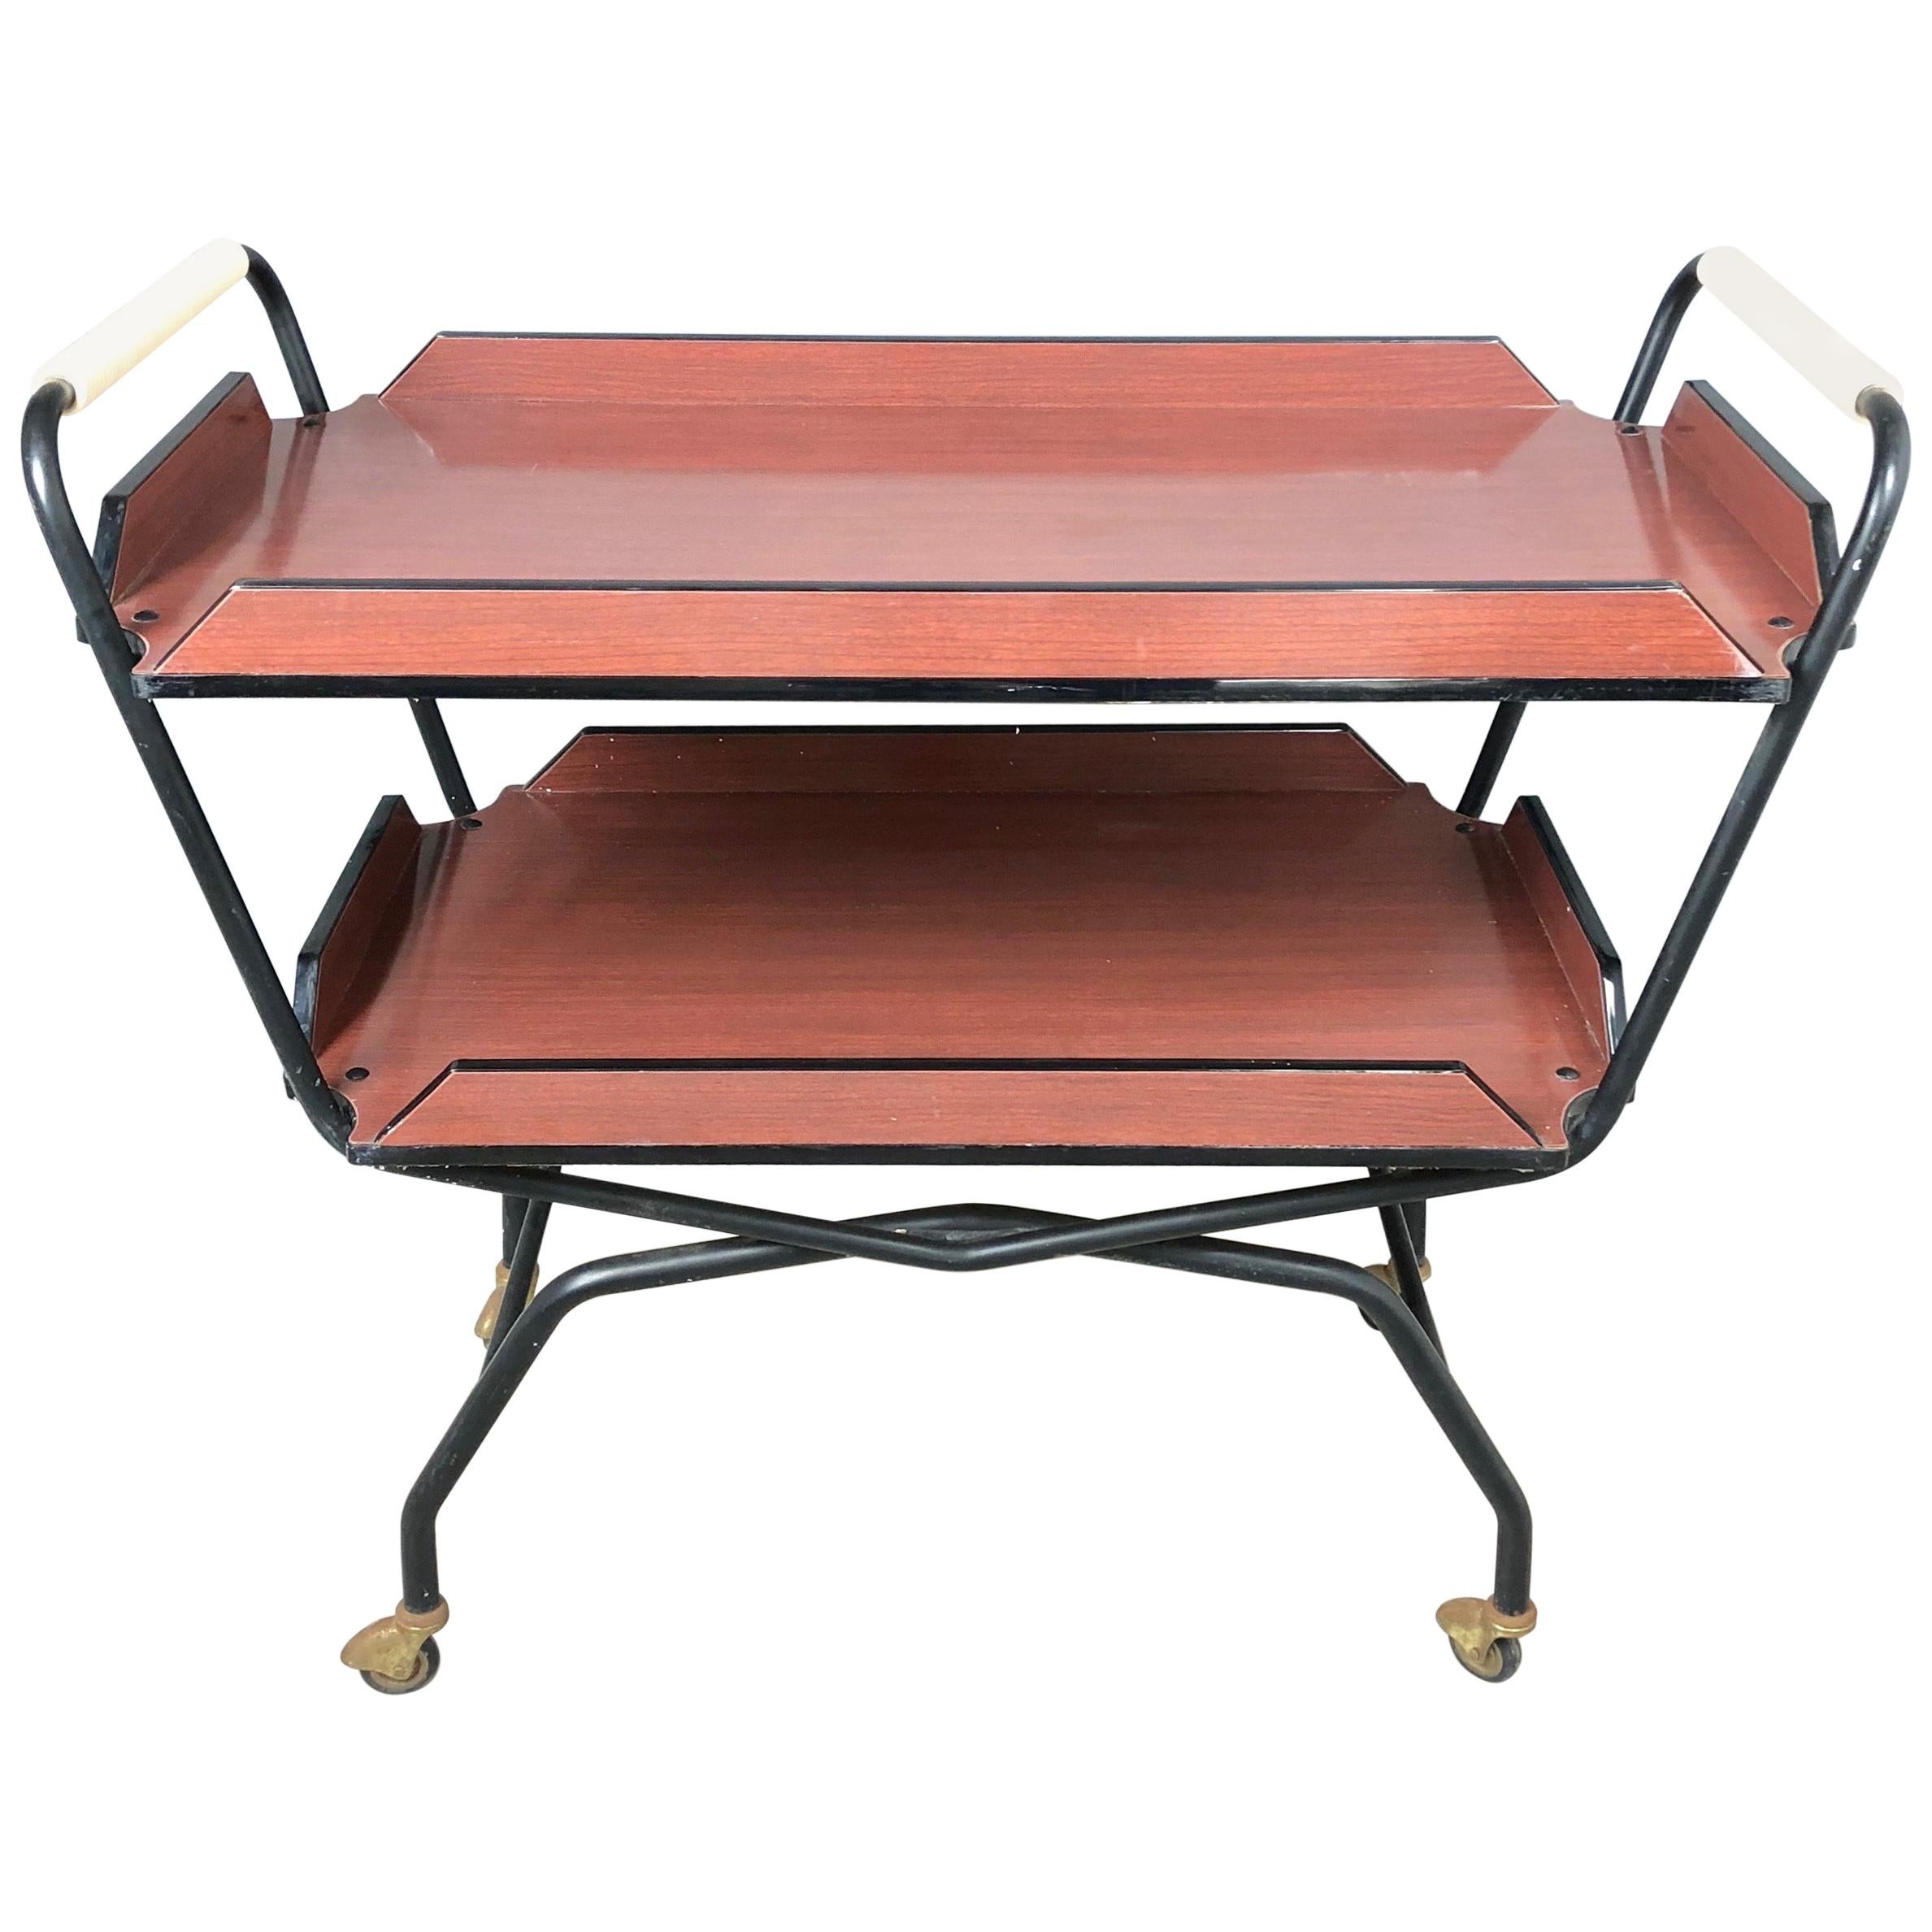 1970s Serving Tray Bar Cart Trolley in Formica and Metal Black and Red Brown